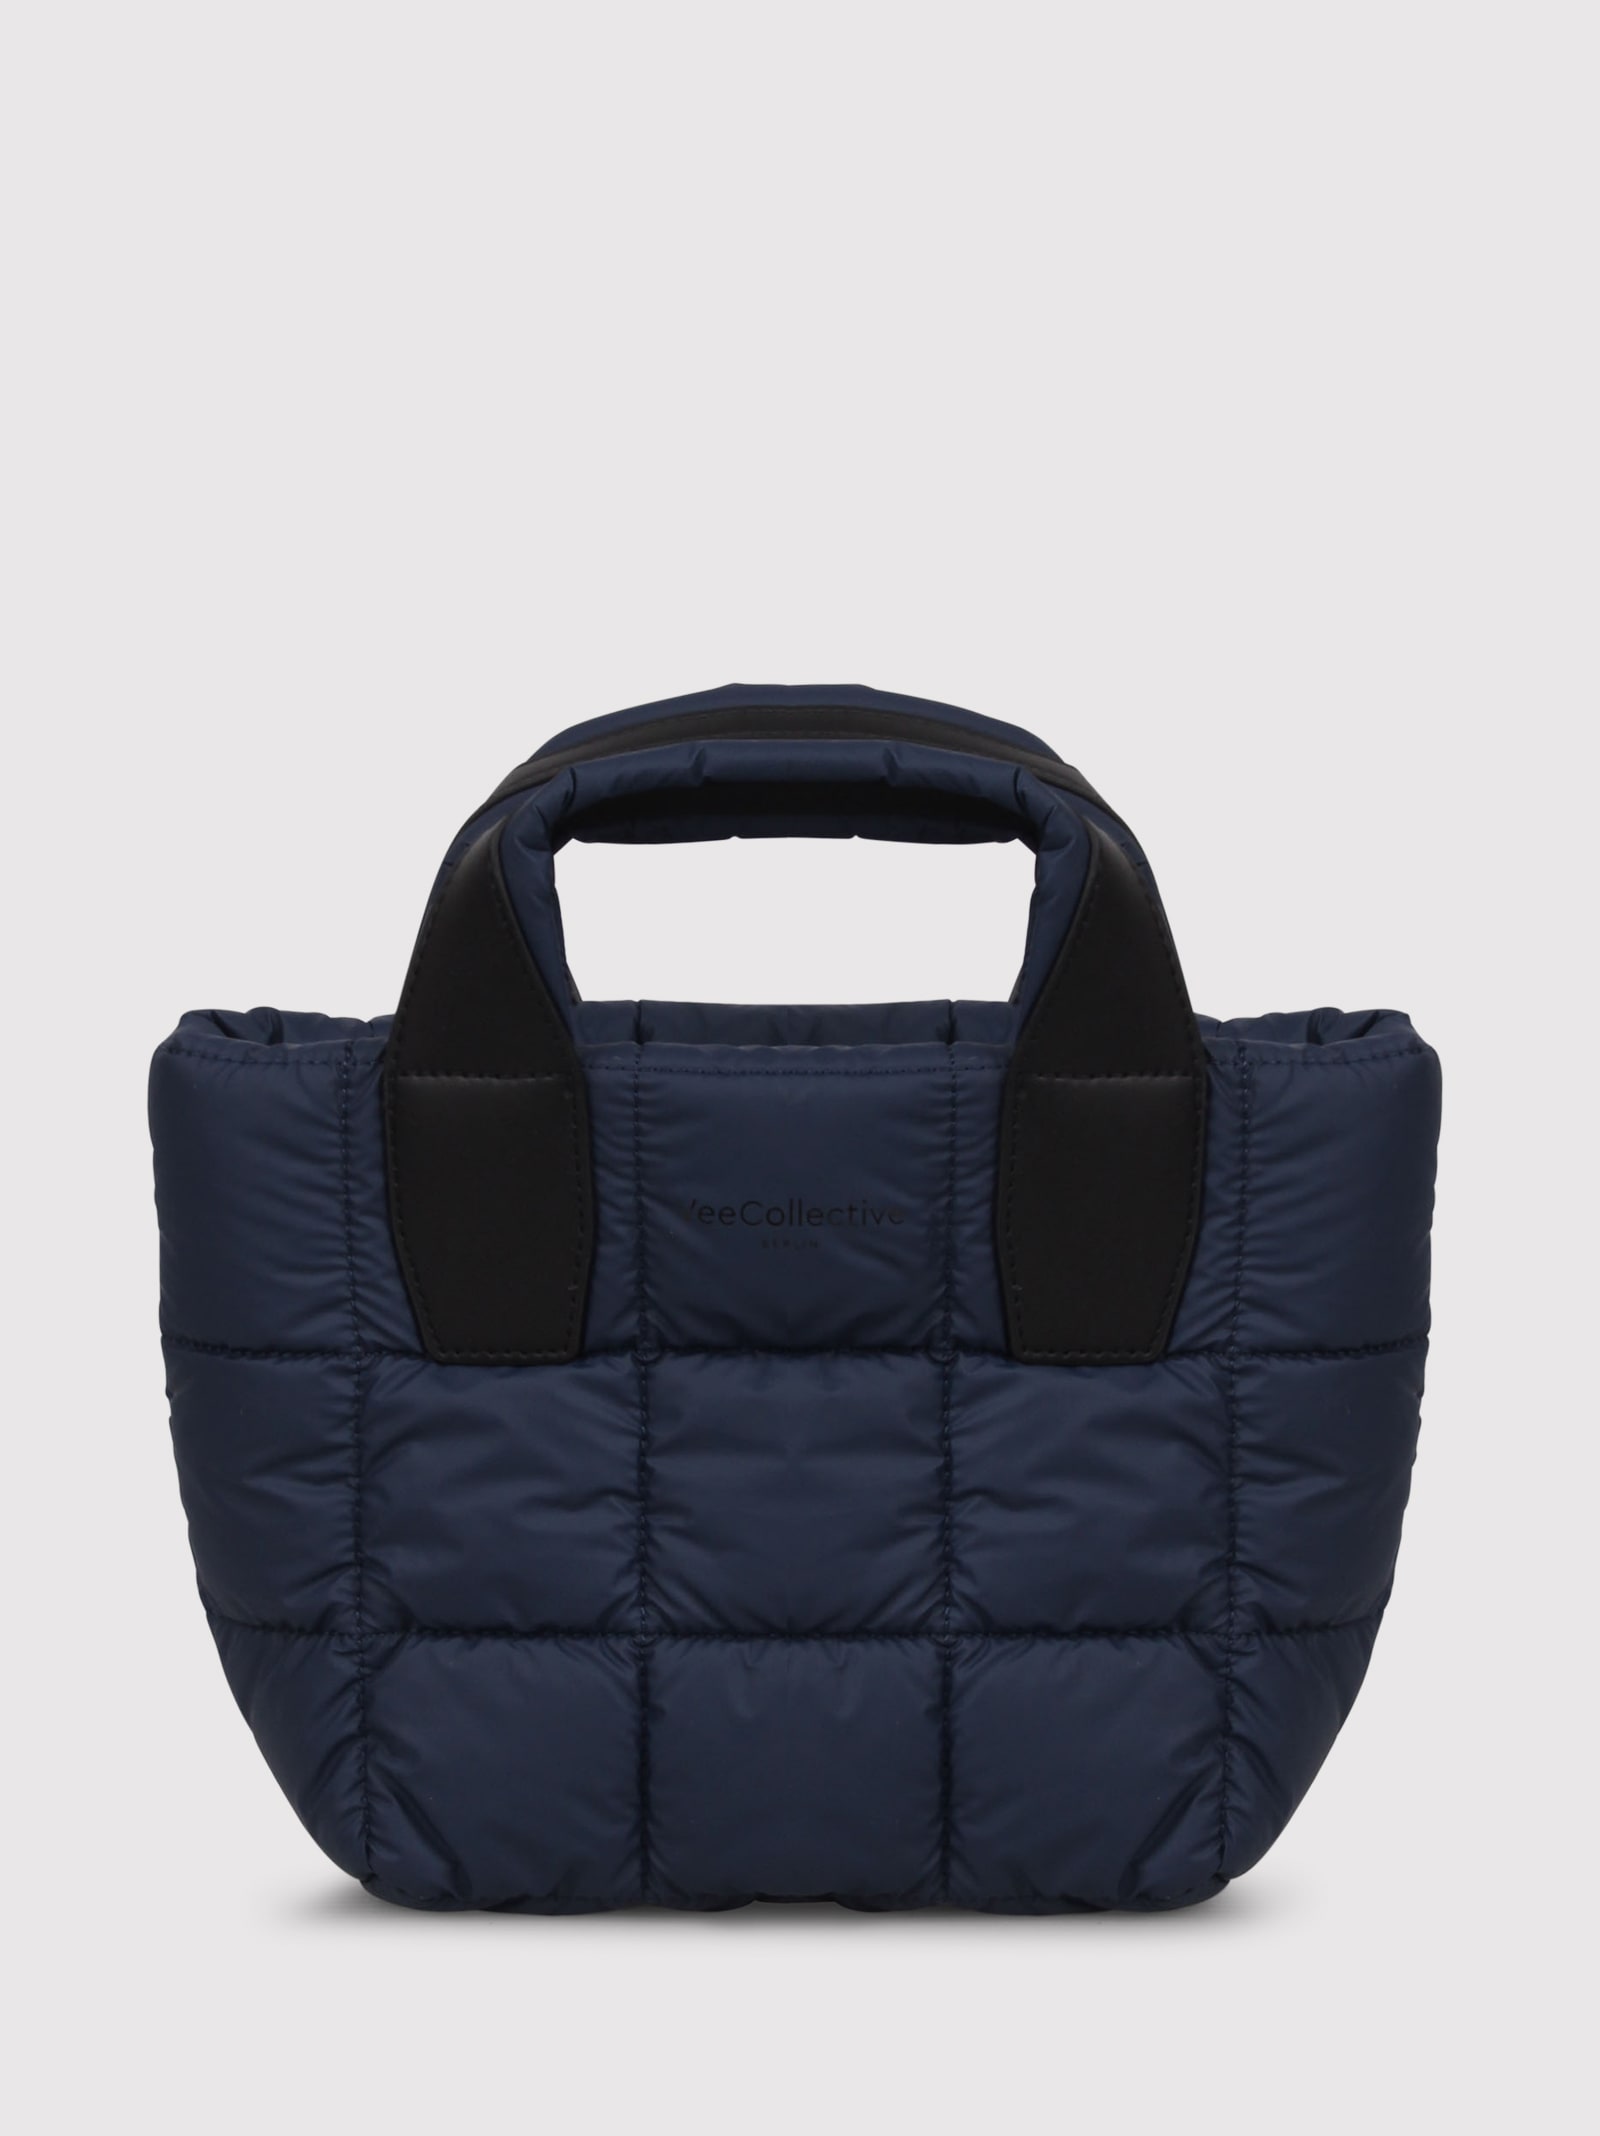 Veecollective Vee Collective Porter Mini Bag In Blue